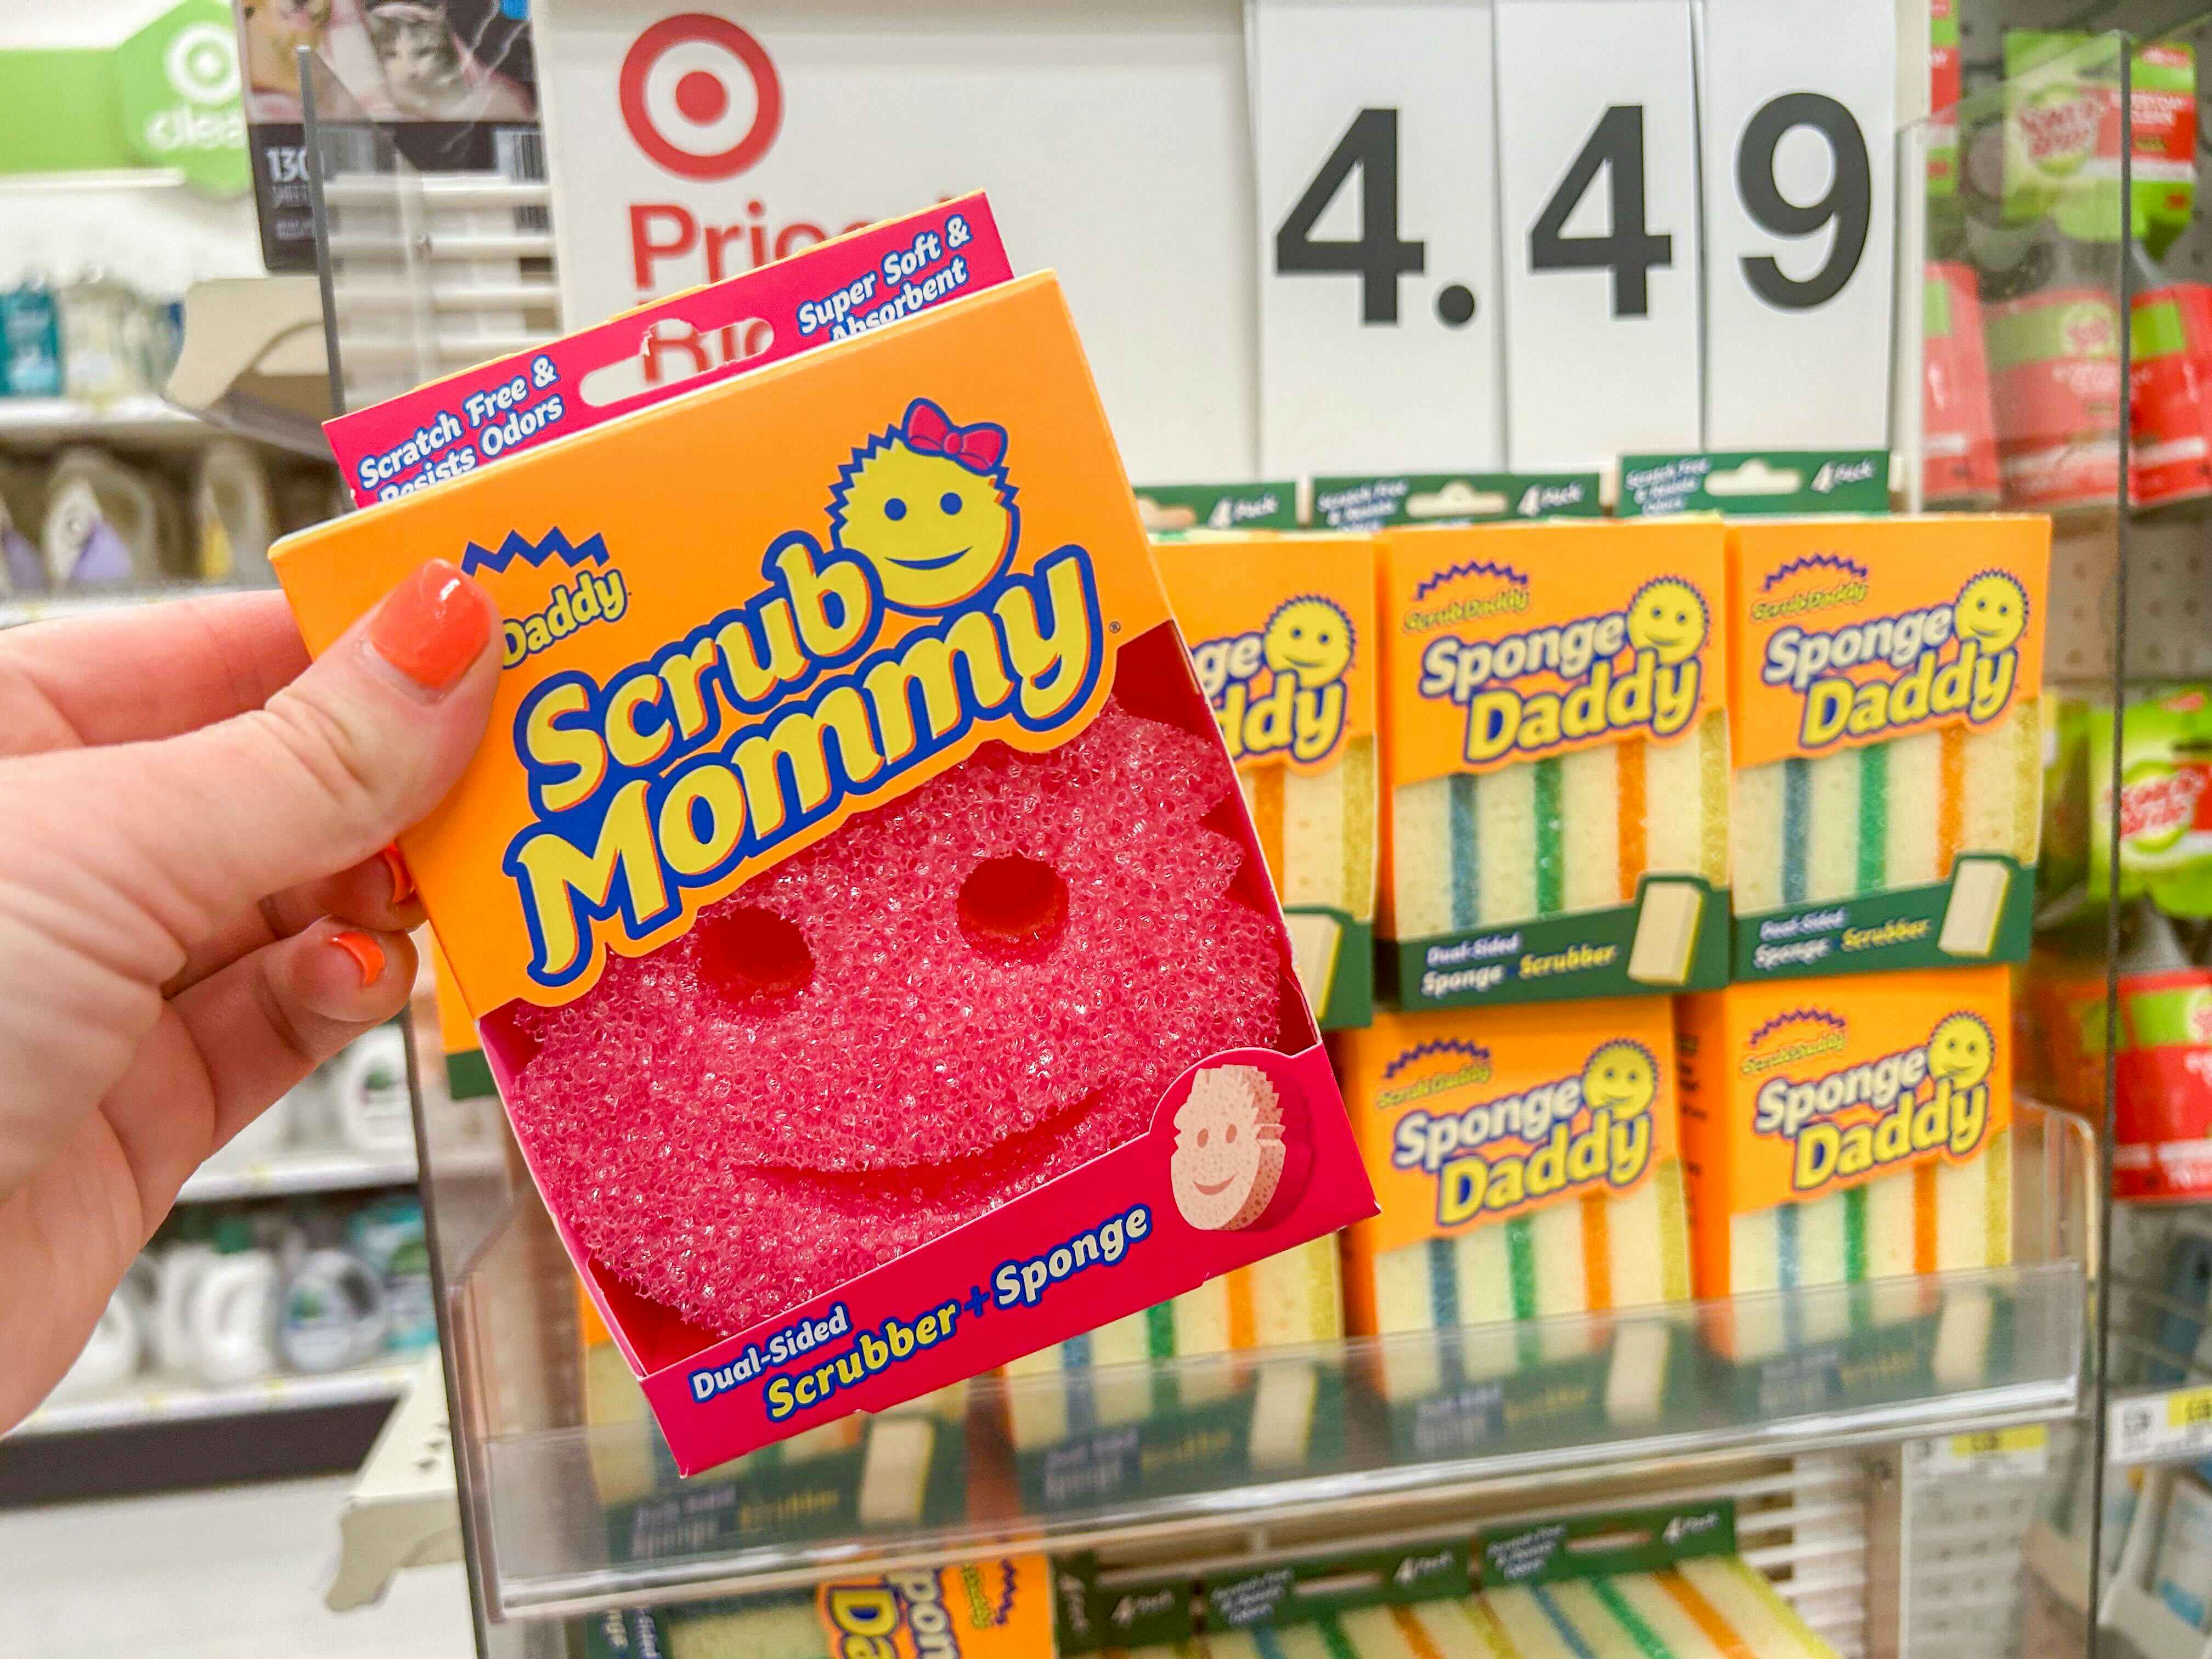 https://prod-cdn-thekrazycouponlady.imgix.net/wp-content/uploads/2023/05/grab-scrub-daddy-products-at-target-hand-holding-scrub-mommy-kcl-1684502586-1684502586.jpg?auto=format&fit=fill&q=25